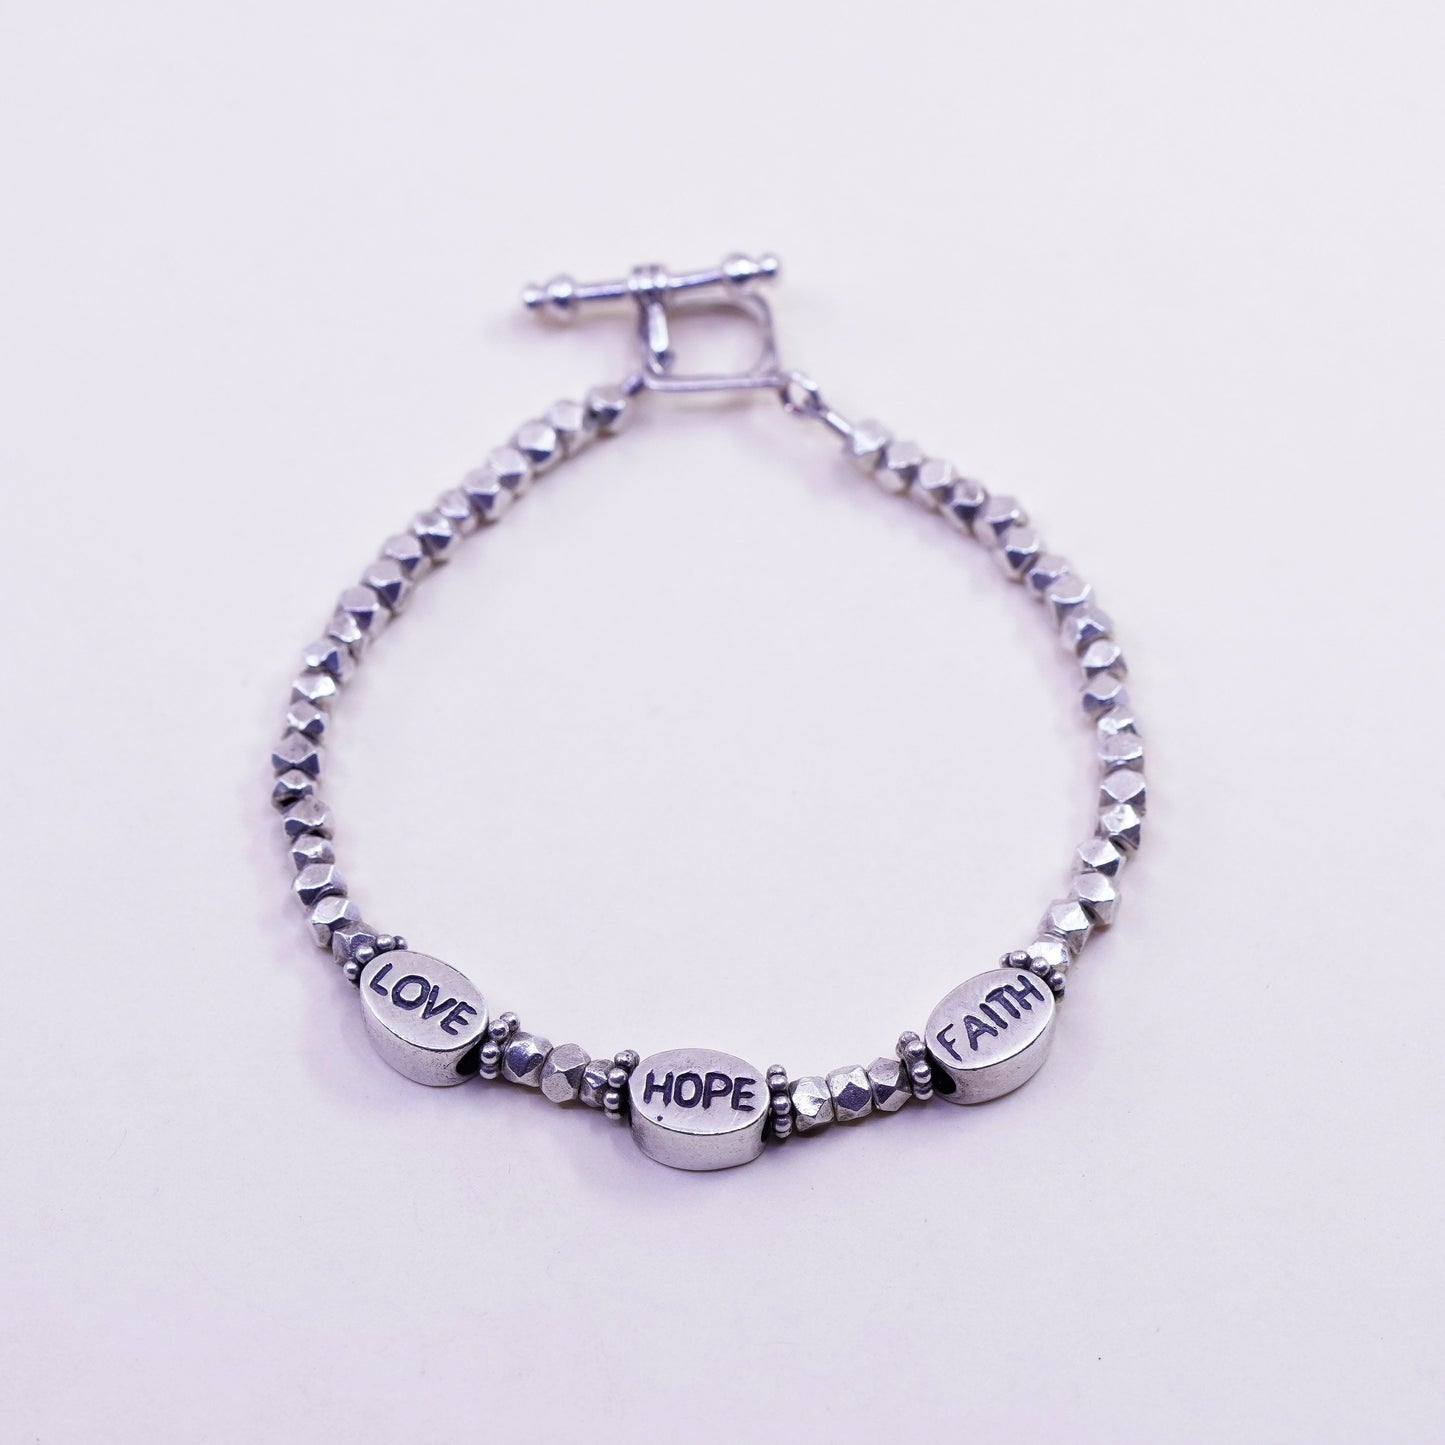 7”, sterling silver handmade bracelet, nugget 925 beads with “love hope faith